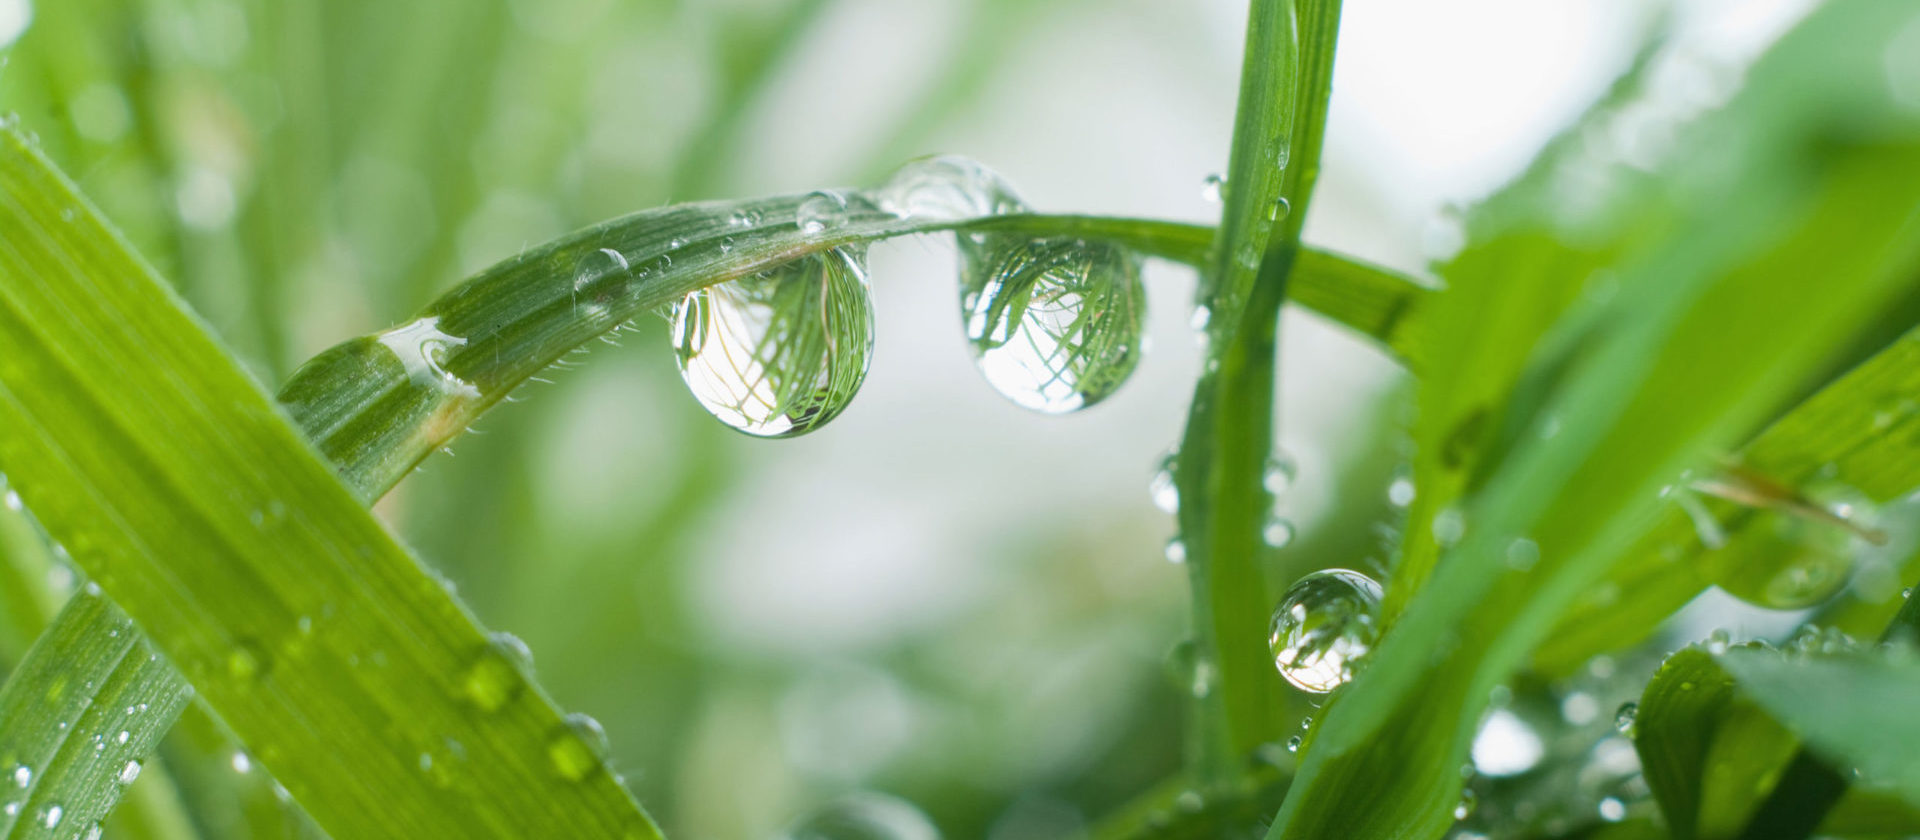 Water droplets on a plant